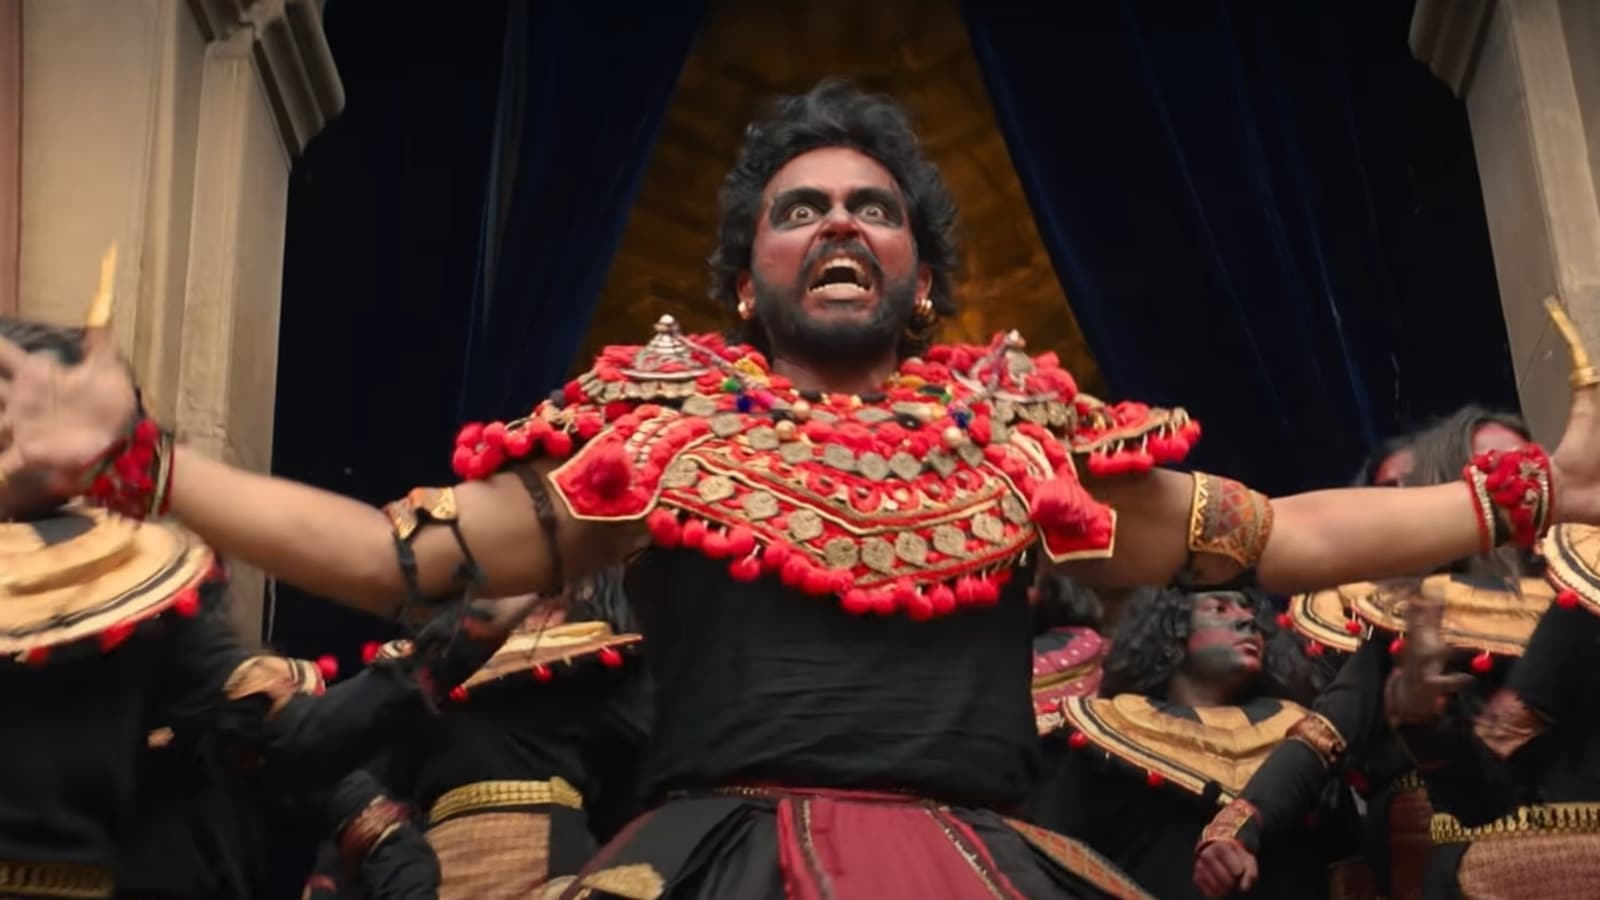 ponniyin-selvan-i-overtakes-brahmastra-vikram-to-become-third-highest-grossing-indian-film-of-2022